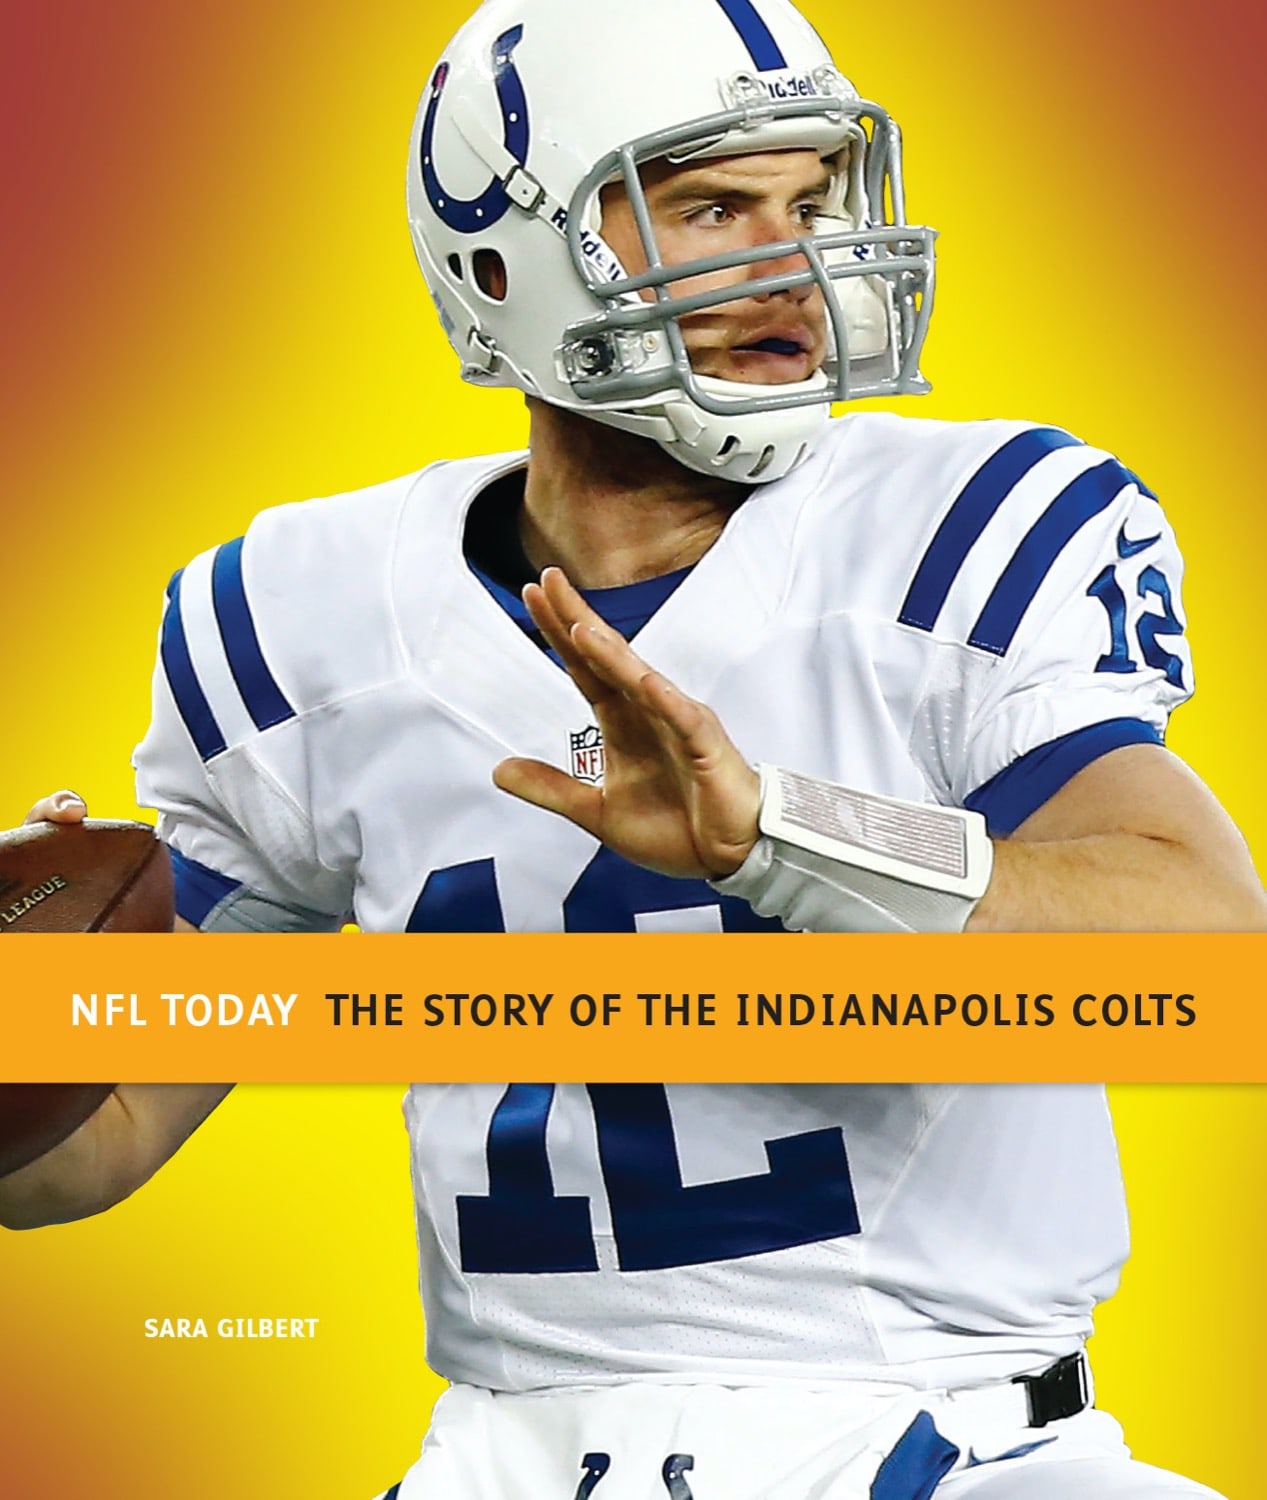 NFL Today: The Story of the Indianapolis Colts